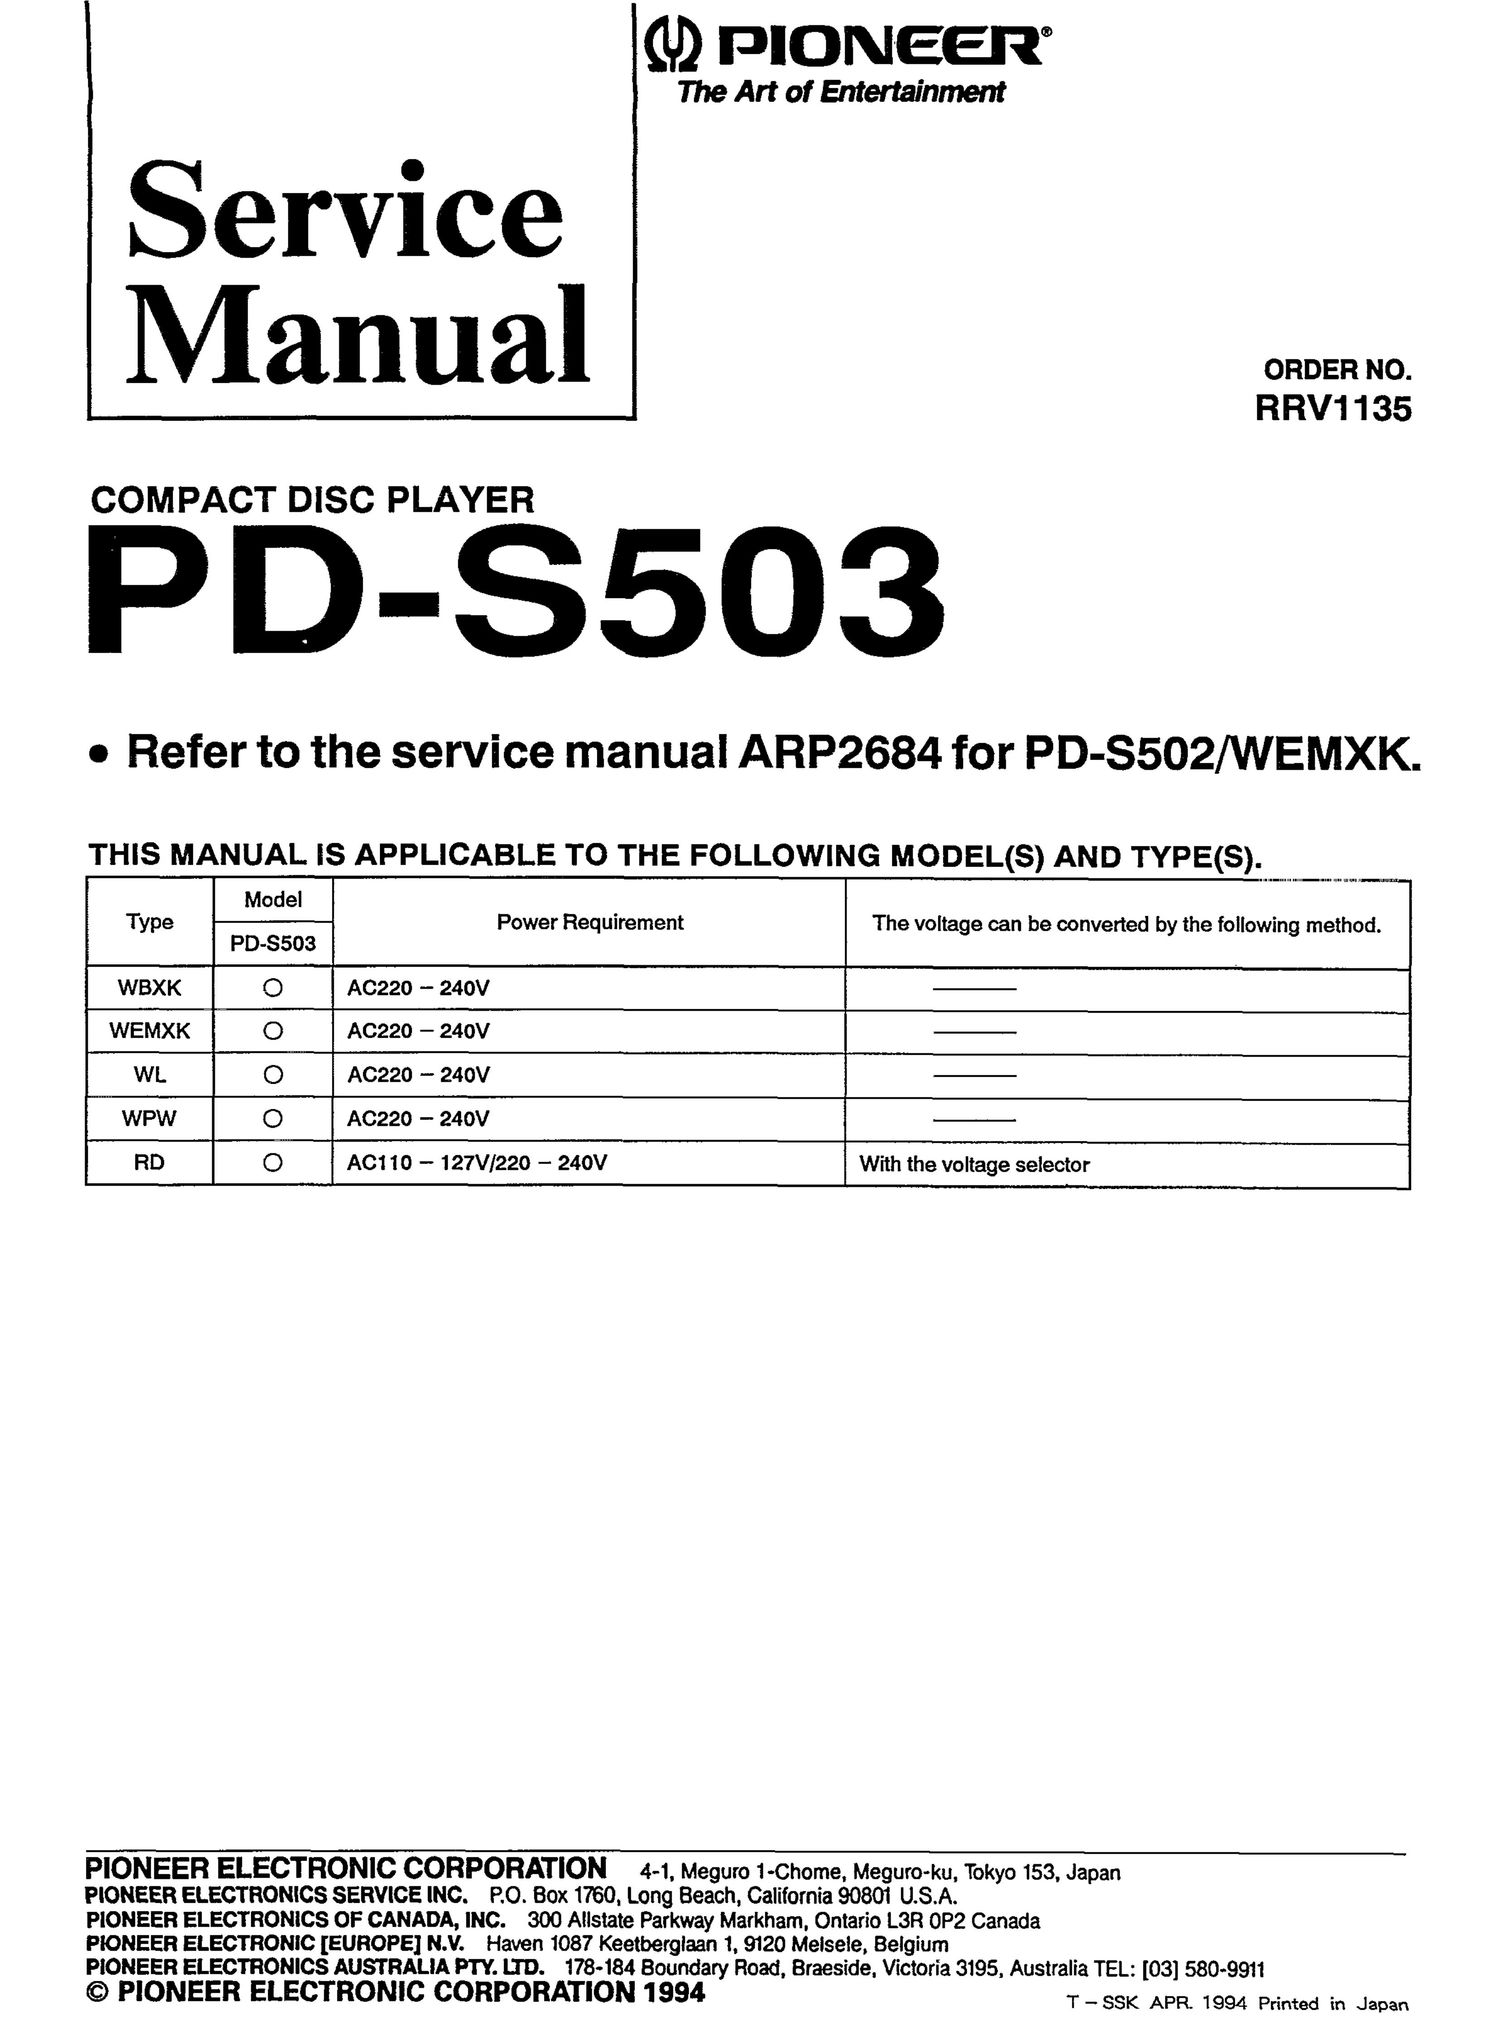 pioneer pds 503 service manual